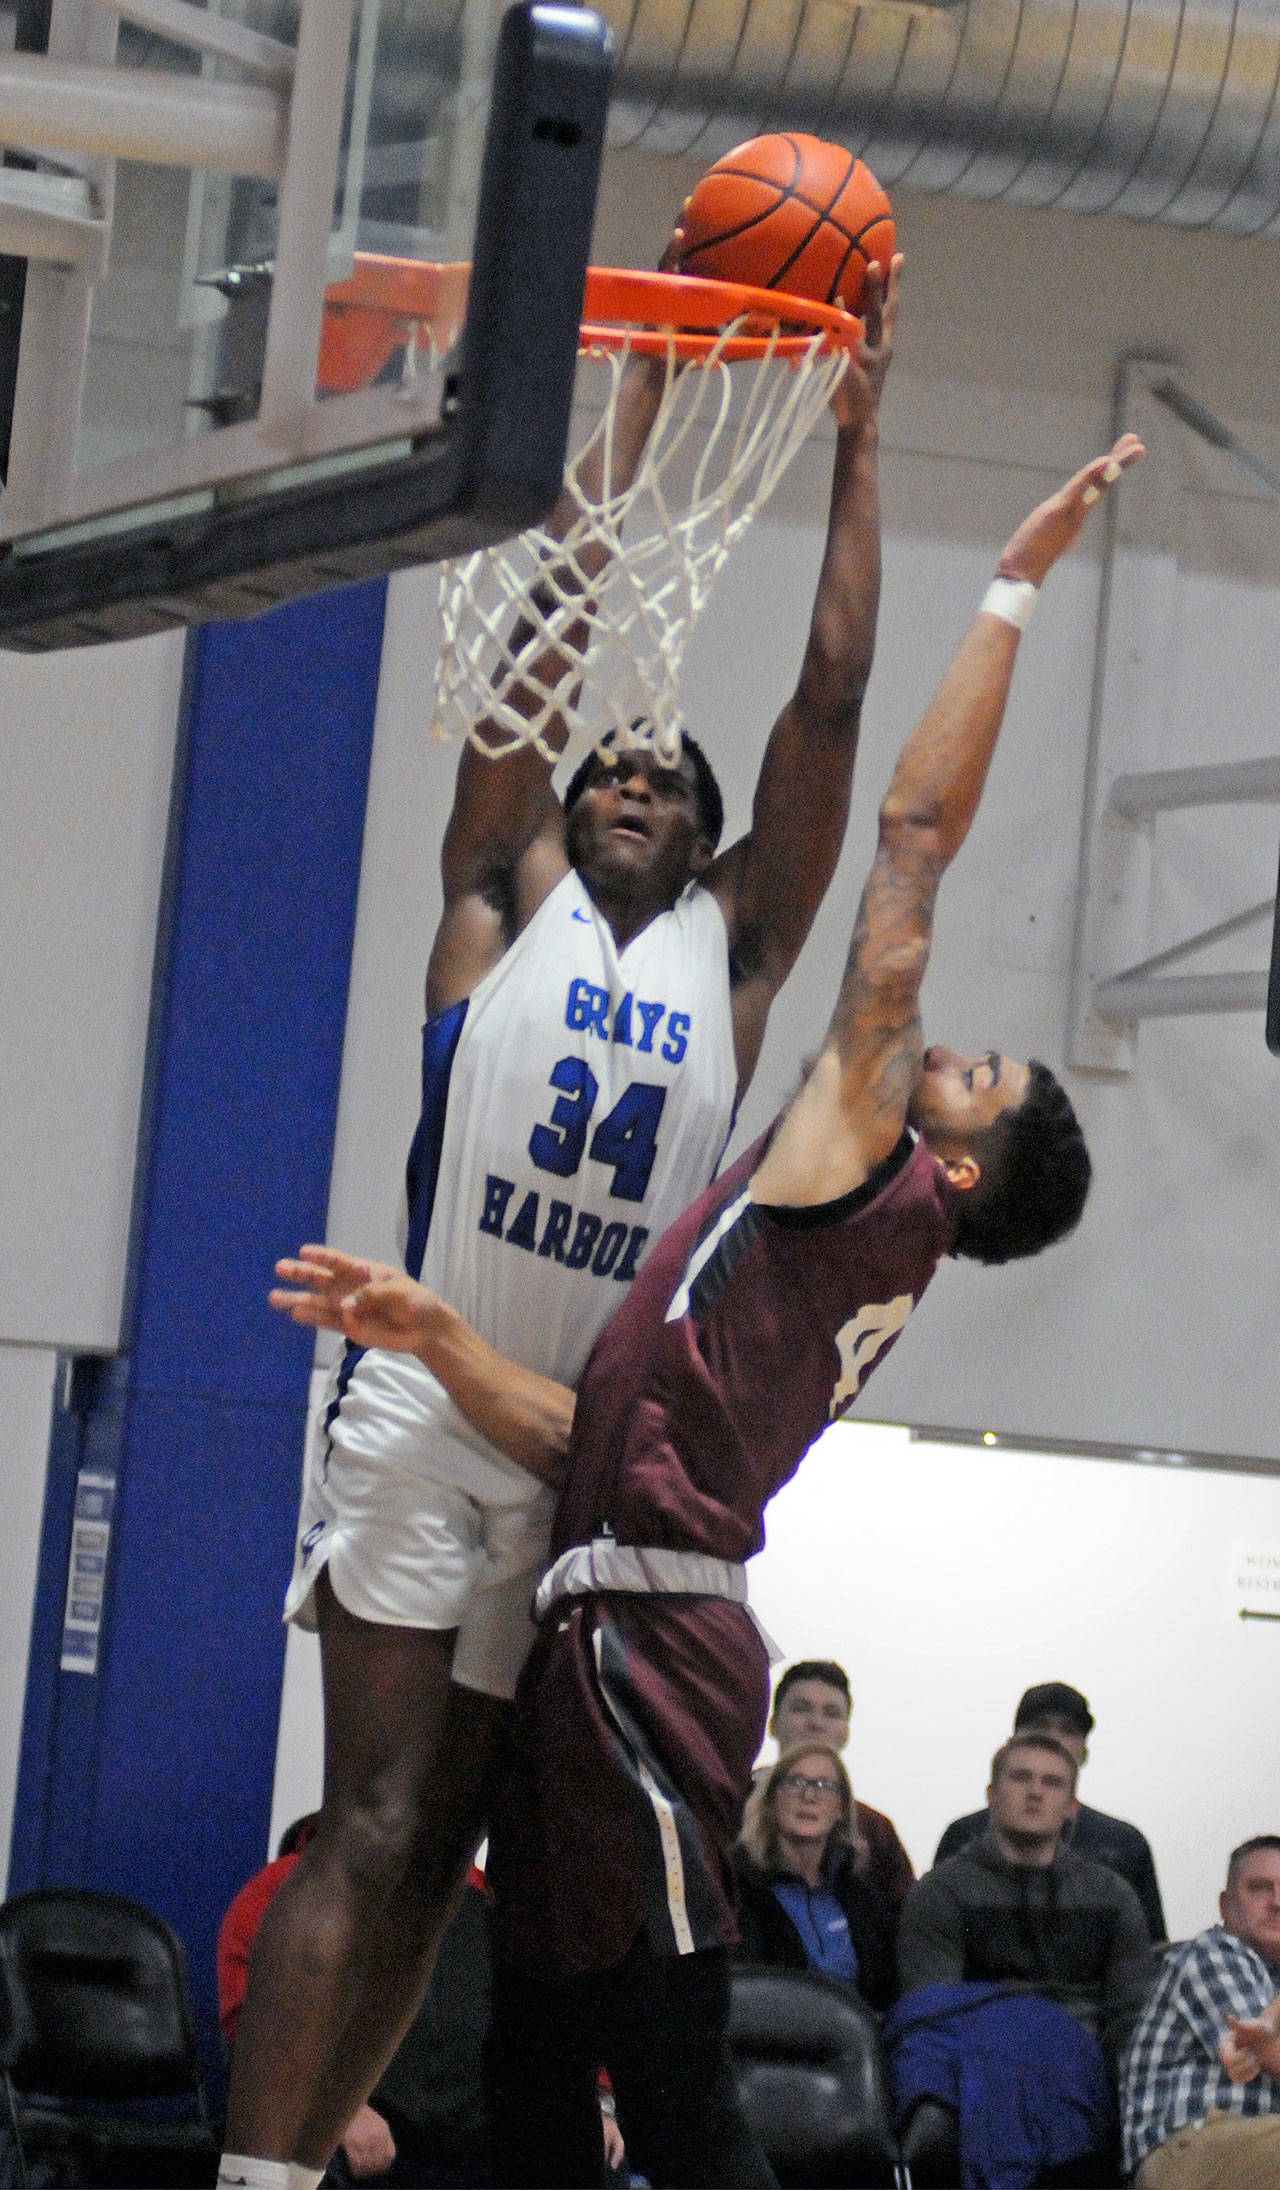 Grays Harbor’s Antoine Hines (34) goes up for a dunk against Pierce College’s Spence McDonald during Wednesday’s NWAC West Region league-opener at Grays Harbor College. The Chokers won 93-68. (Ryan Sparks | Grays Harbor News Group)